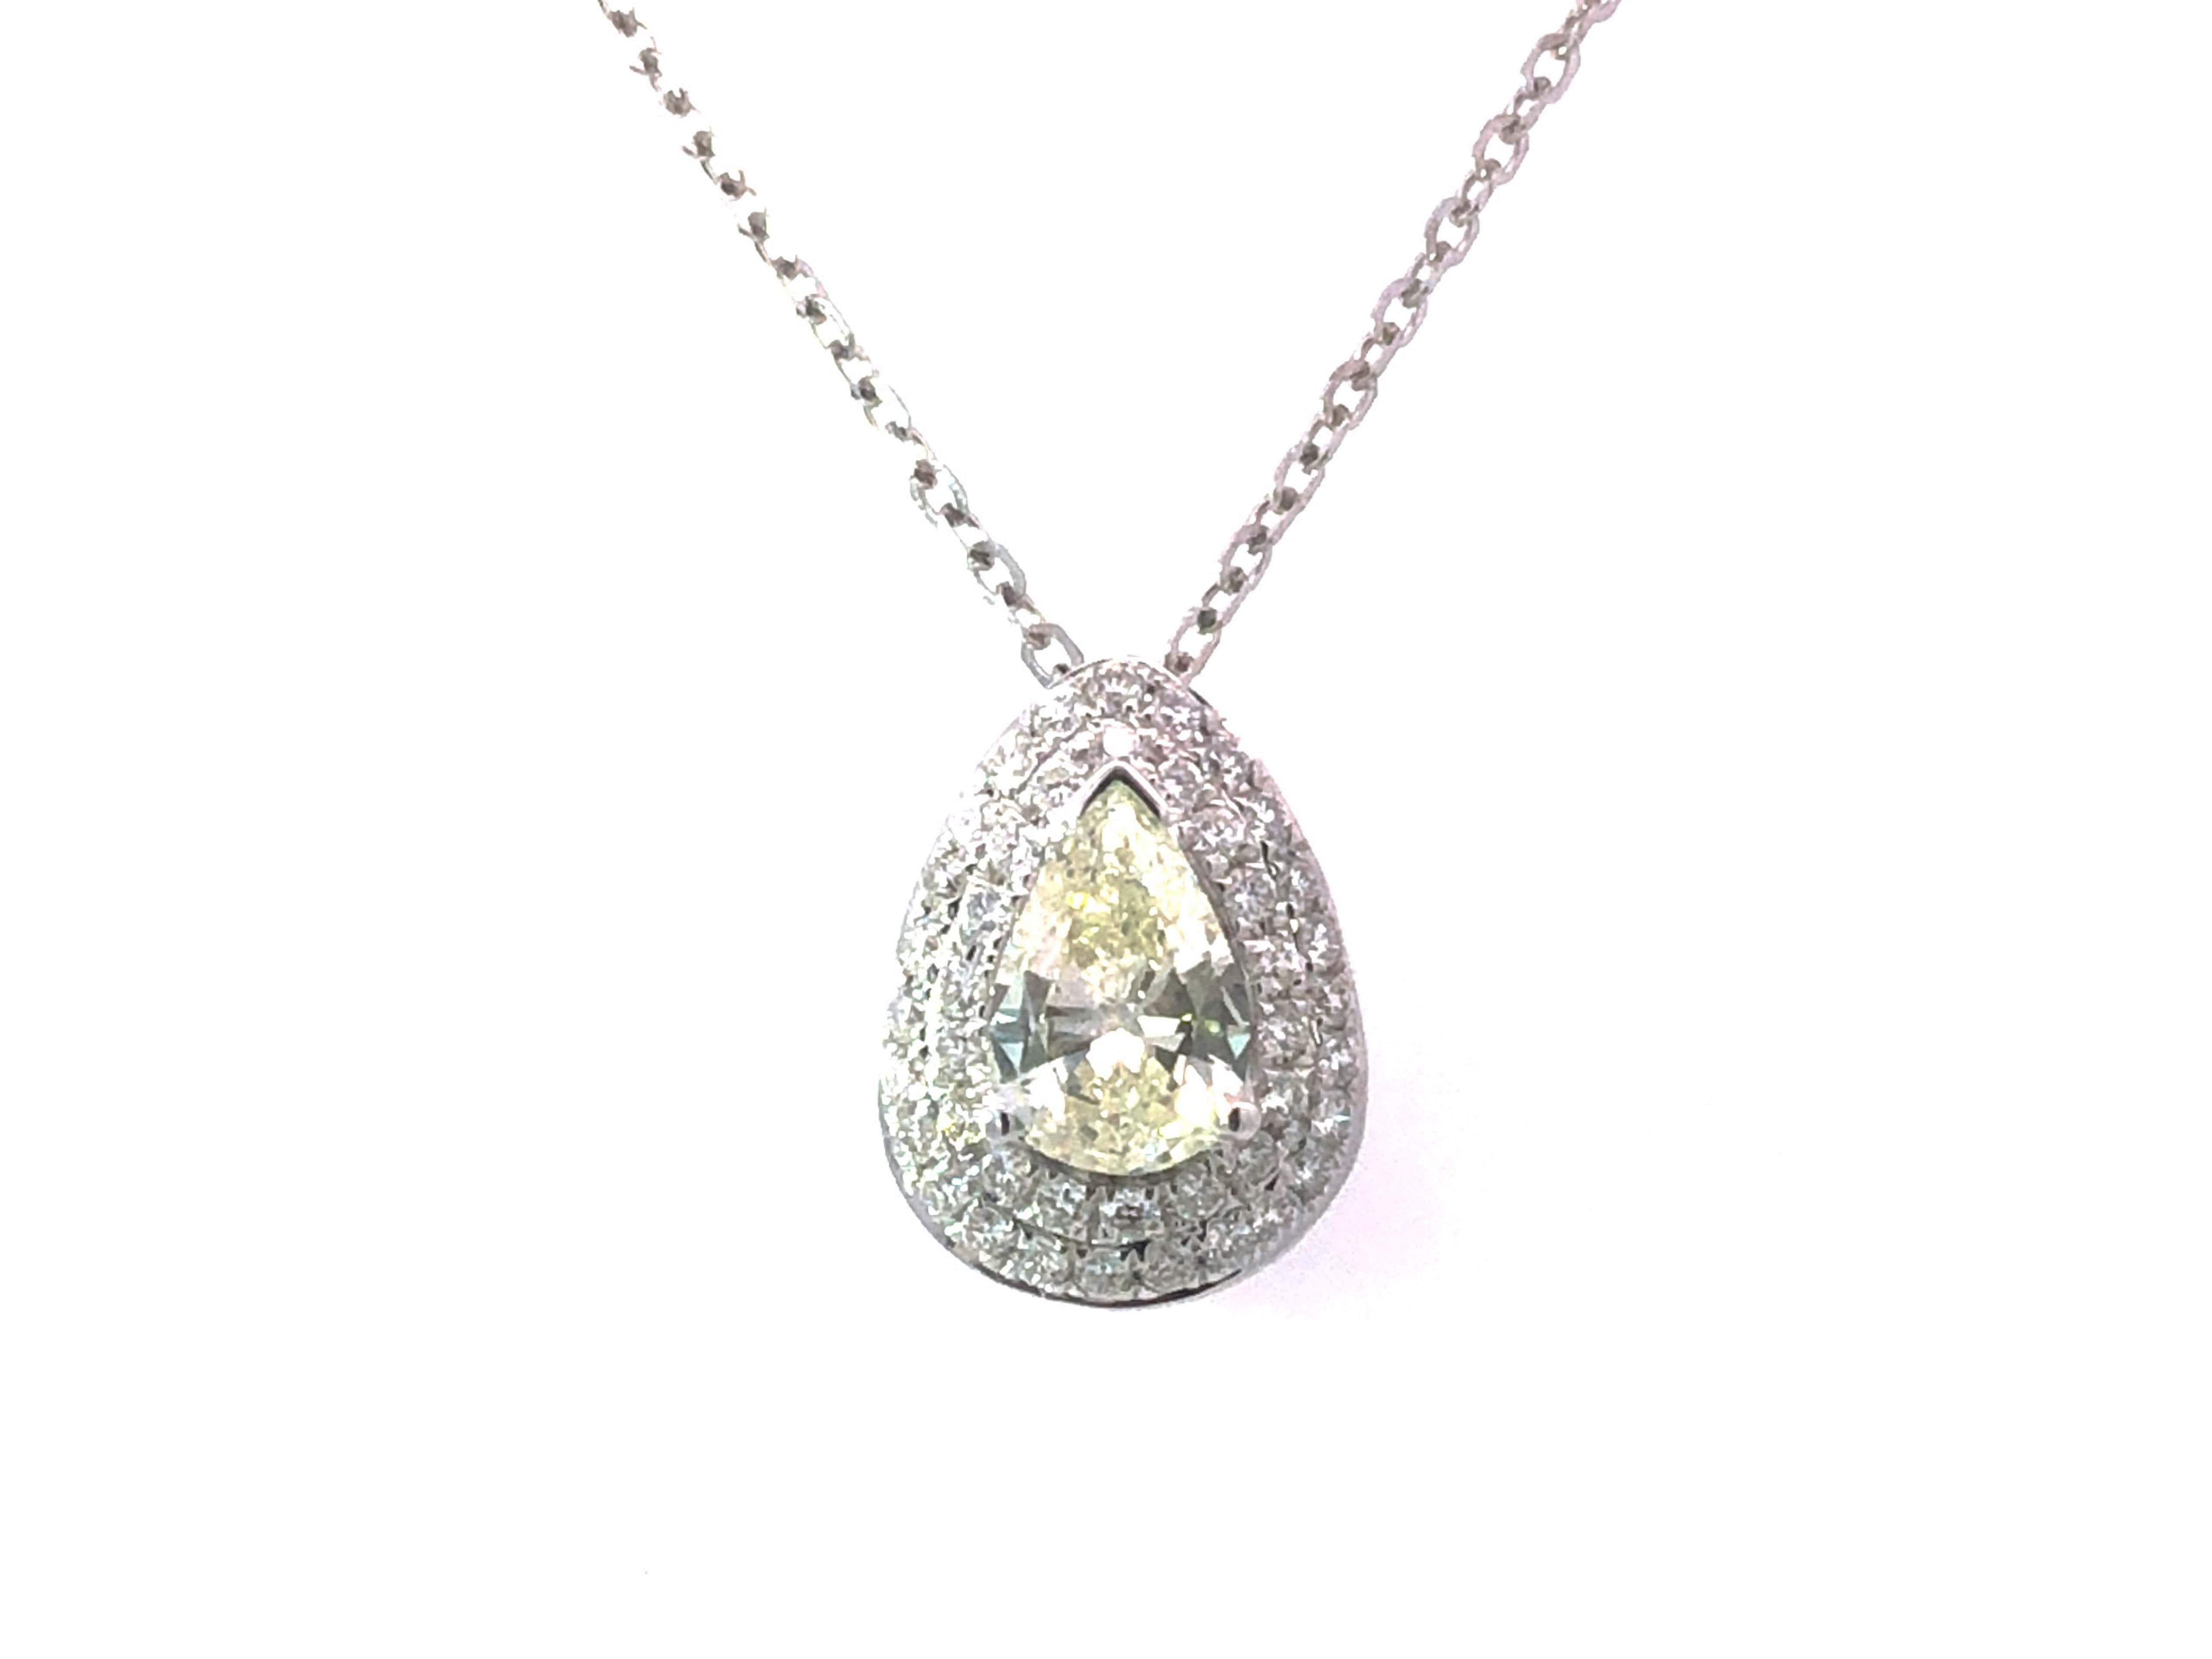 Double Halo Pear Shaped Diamond Pendant in 18k White Gold In Excellent Condition For Sale In Honolulu, HI